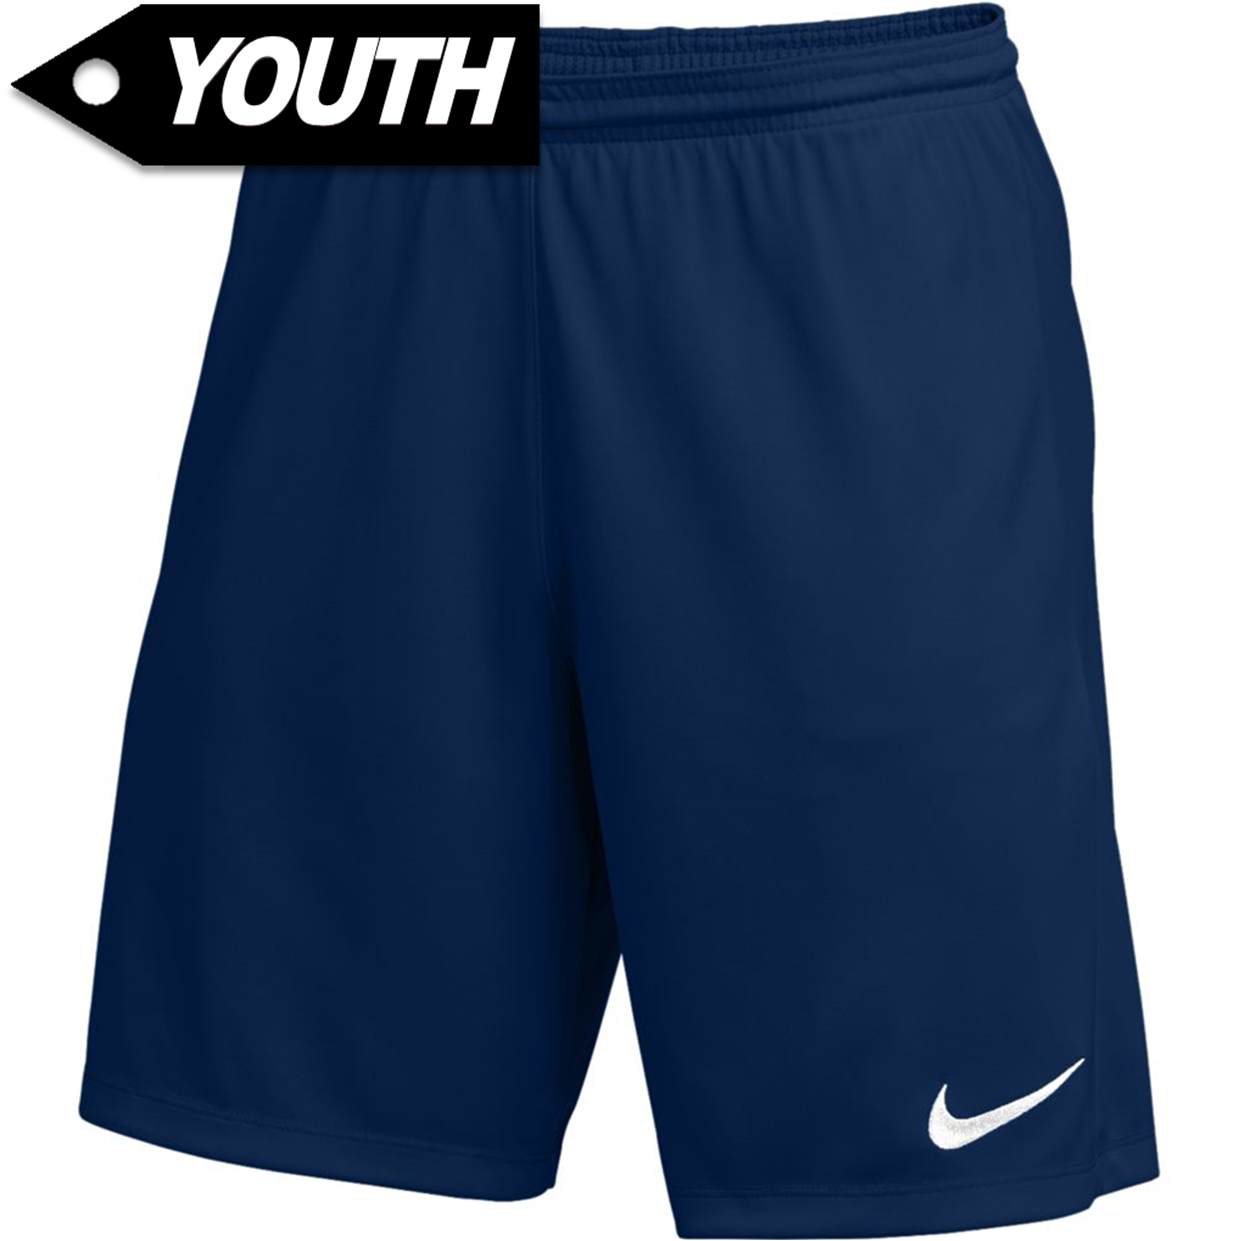 WUFC Short [Youth]